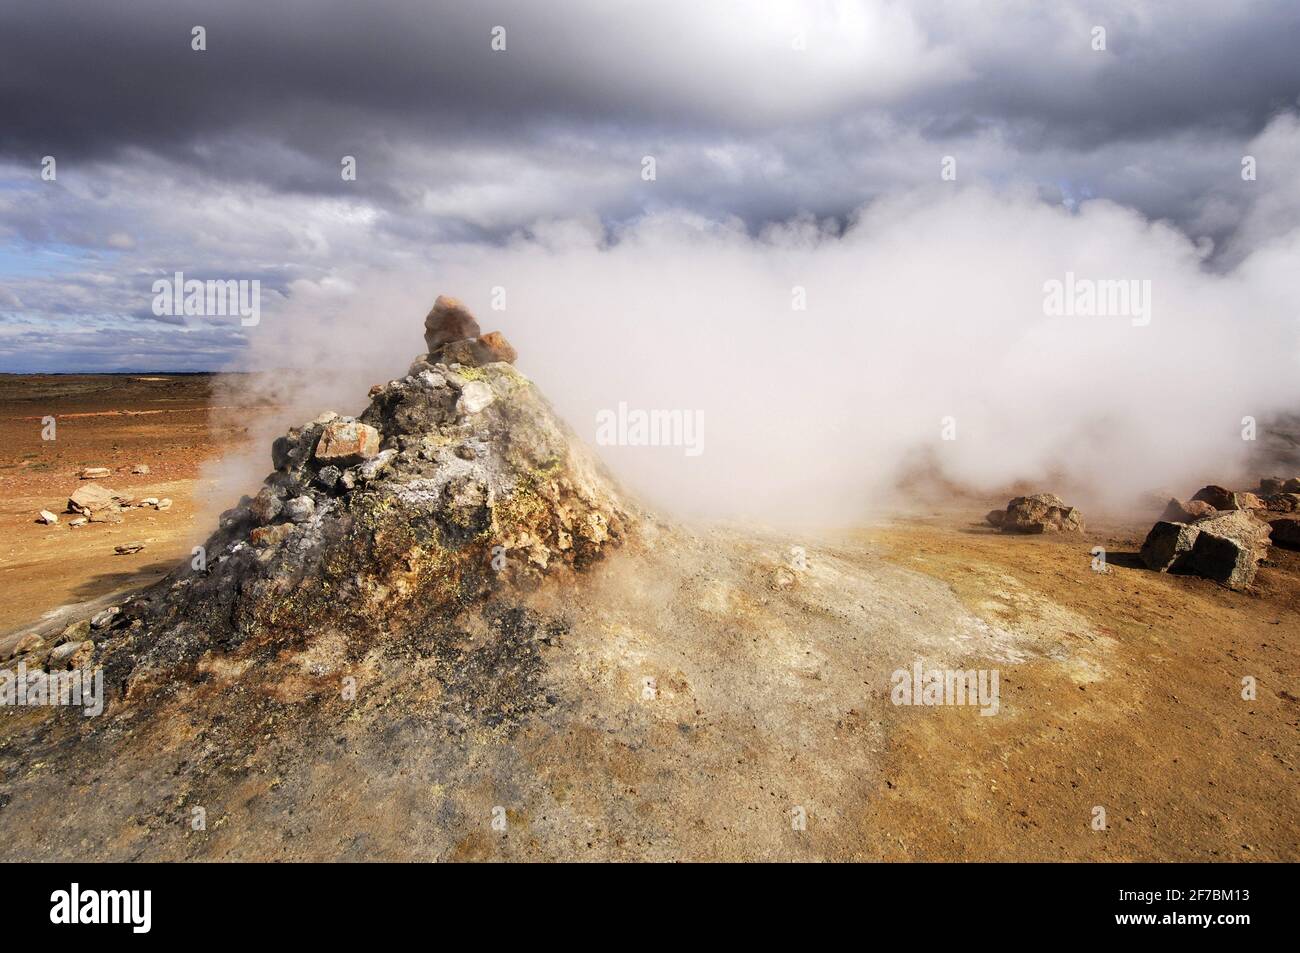 Steaming geothermal vent or fumarole at Hverarond near Myvatn, north Iceland, Iceland Stock Photo